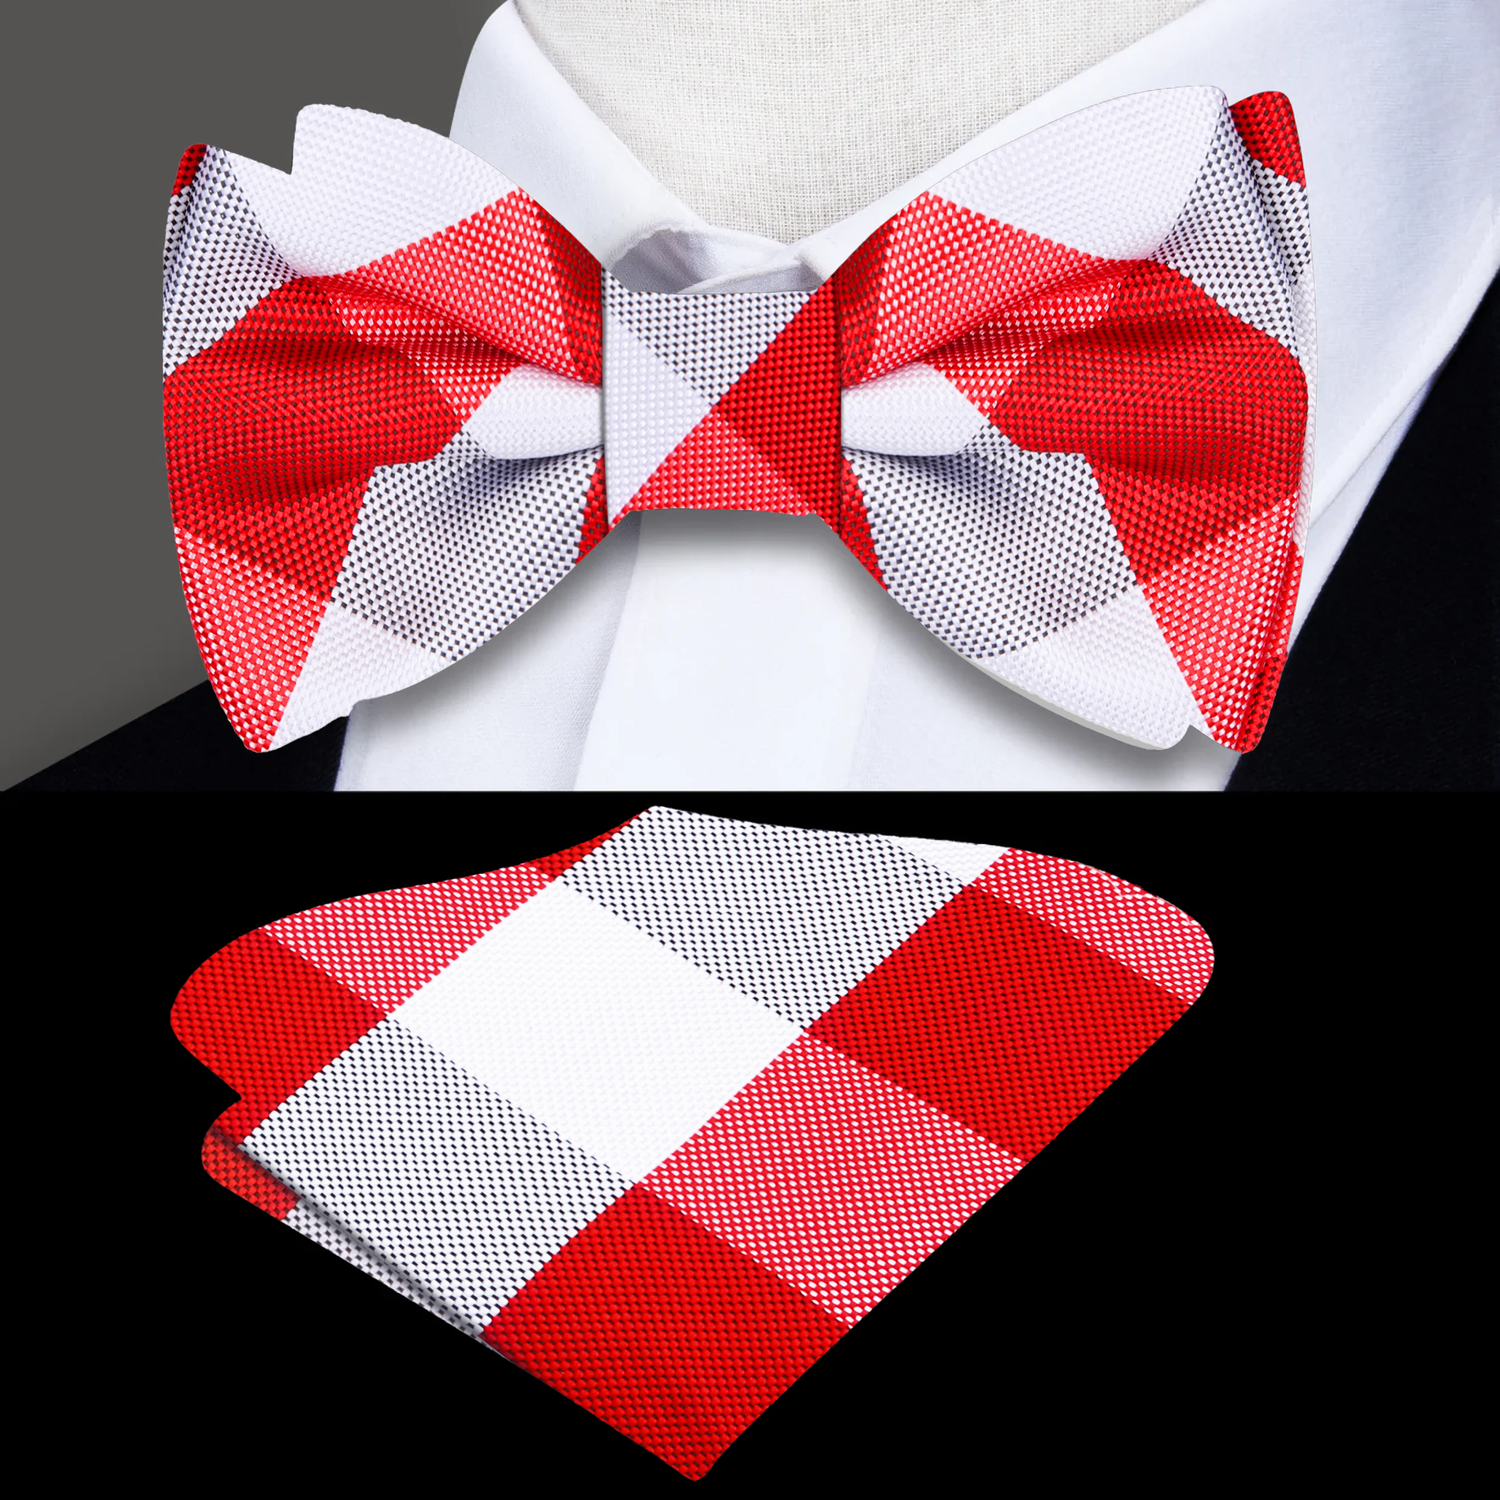 Main View: Red, White Plaid Bow Tie and Pocket Square